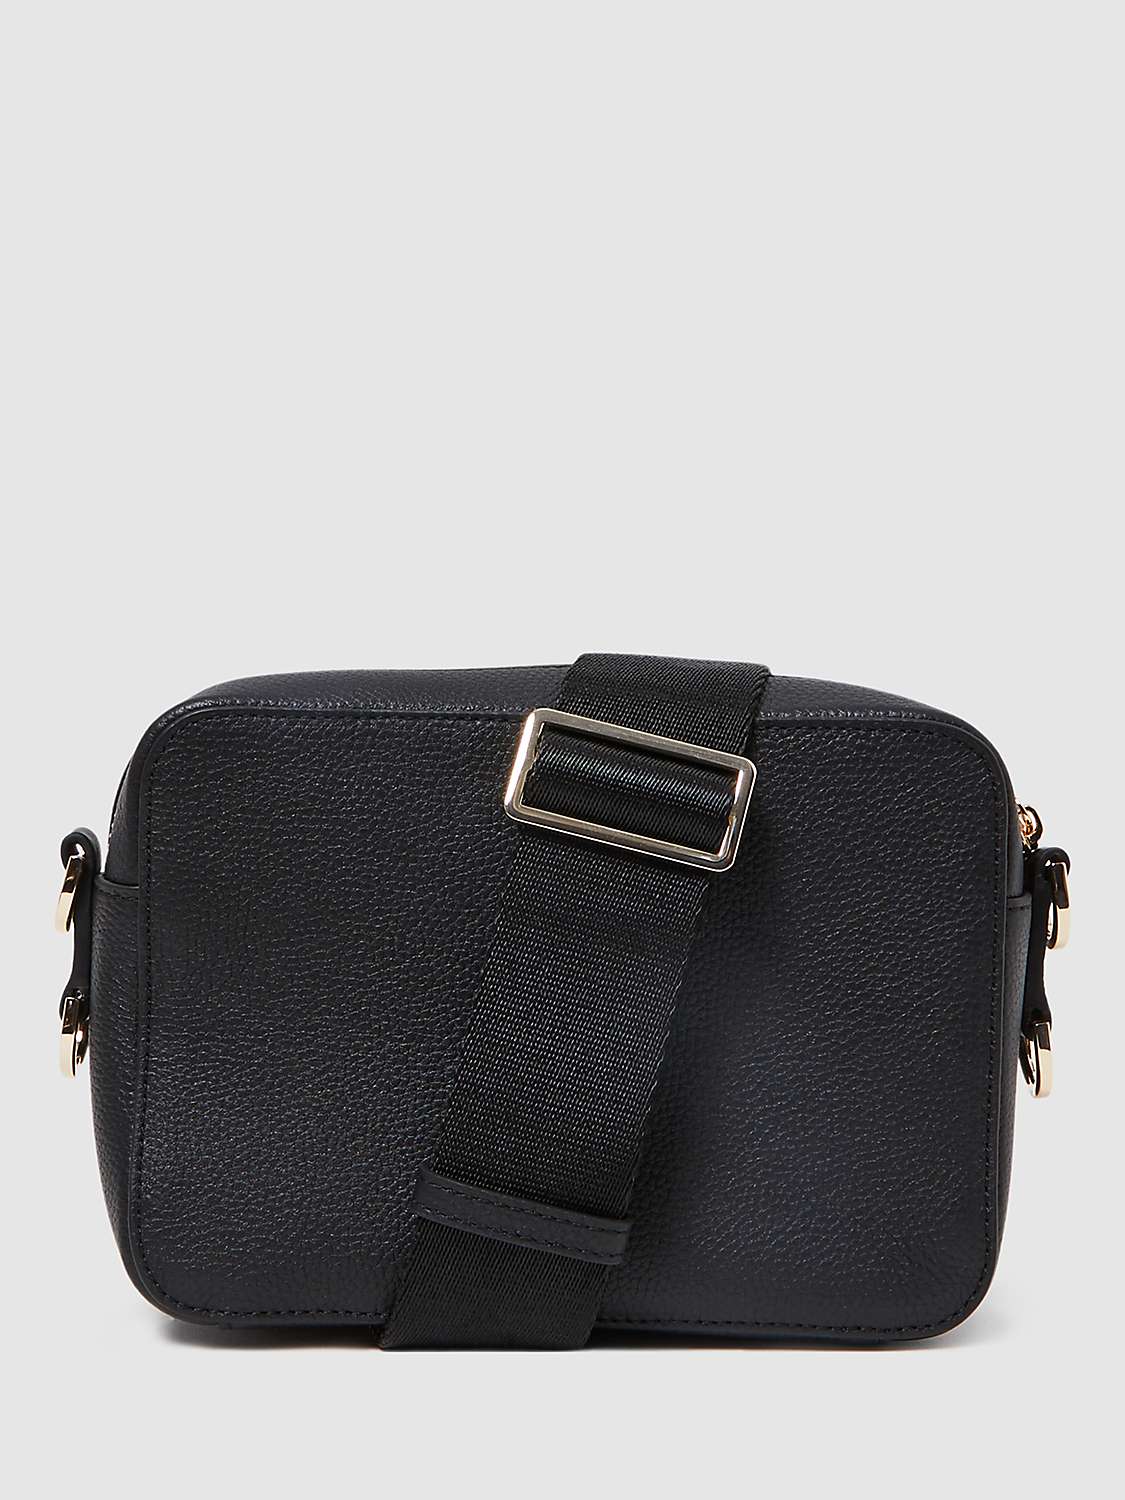 Buy Reiss Clea Leather Cross Body Camera Bag Online at johnlewis.com